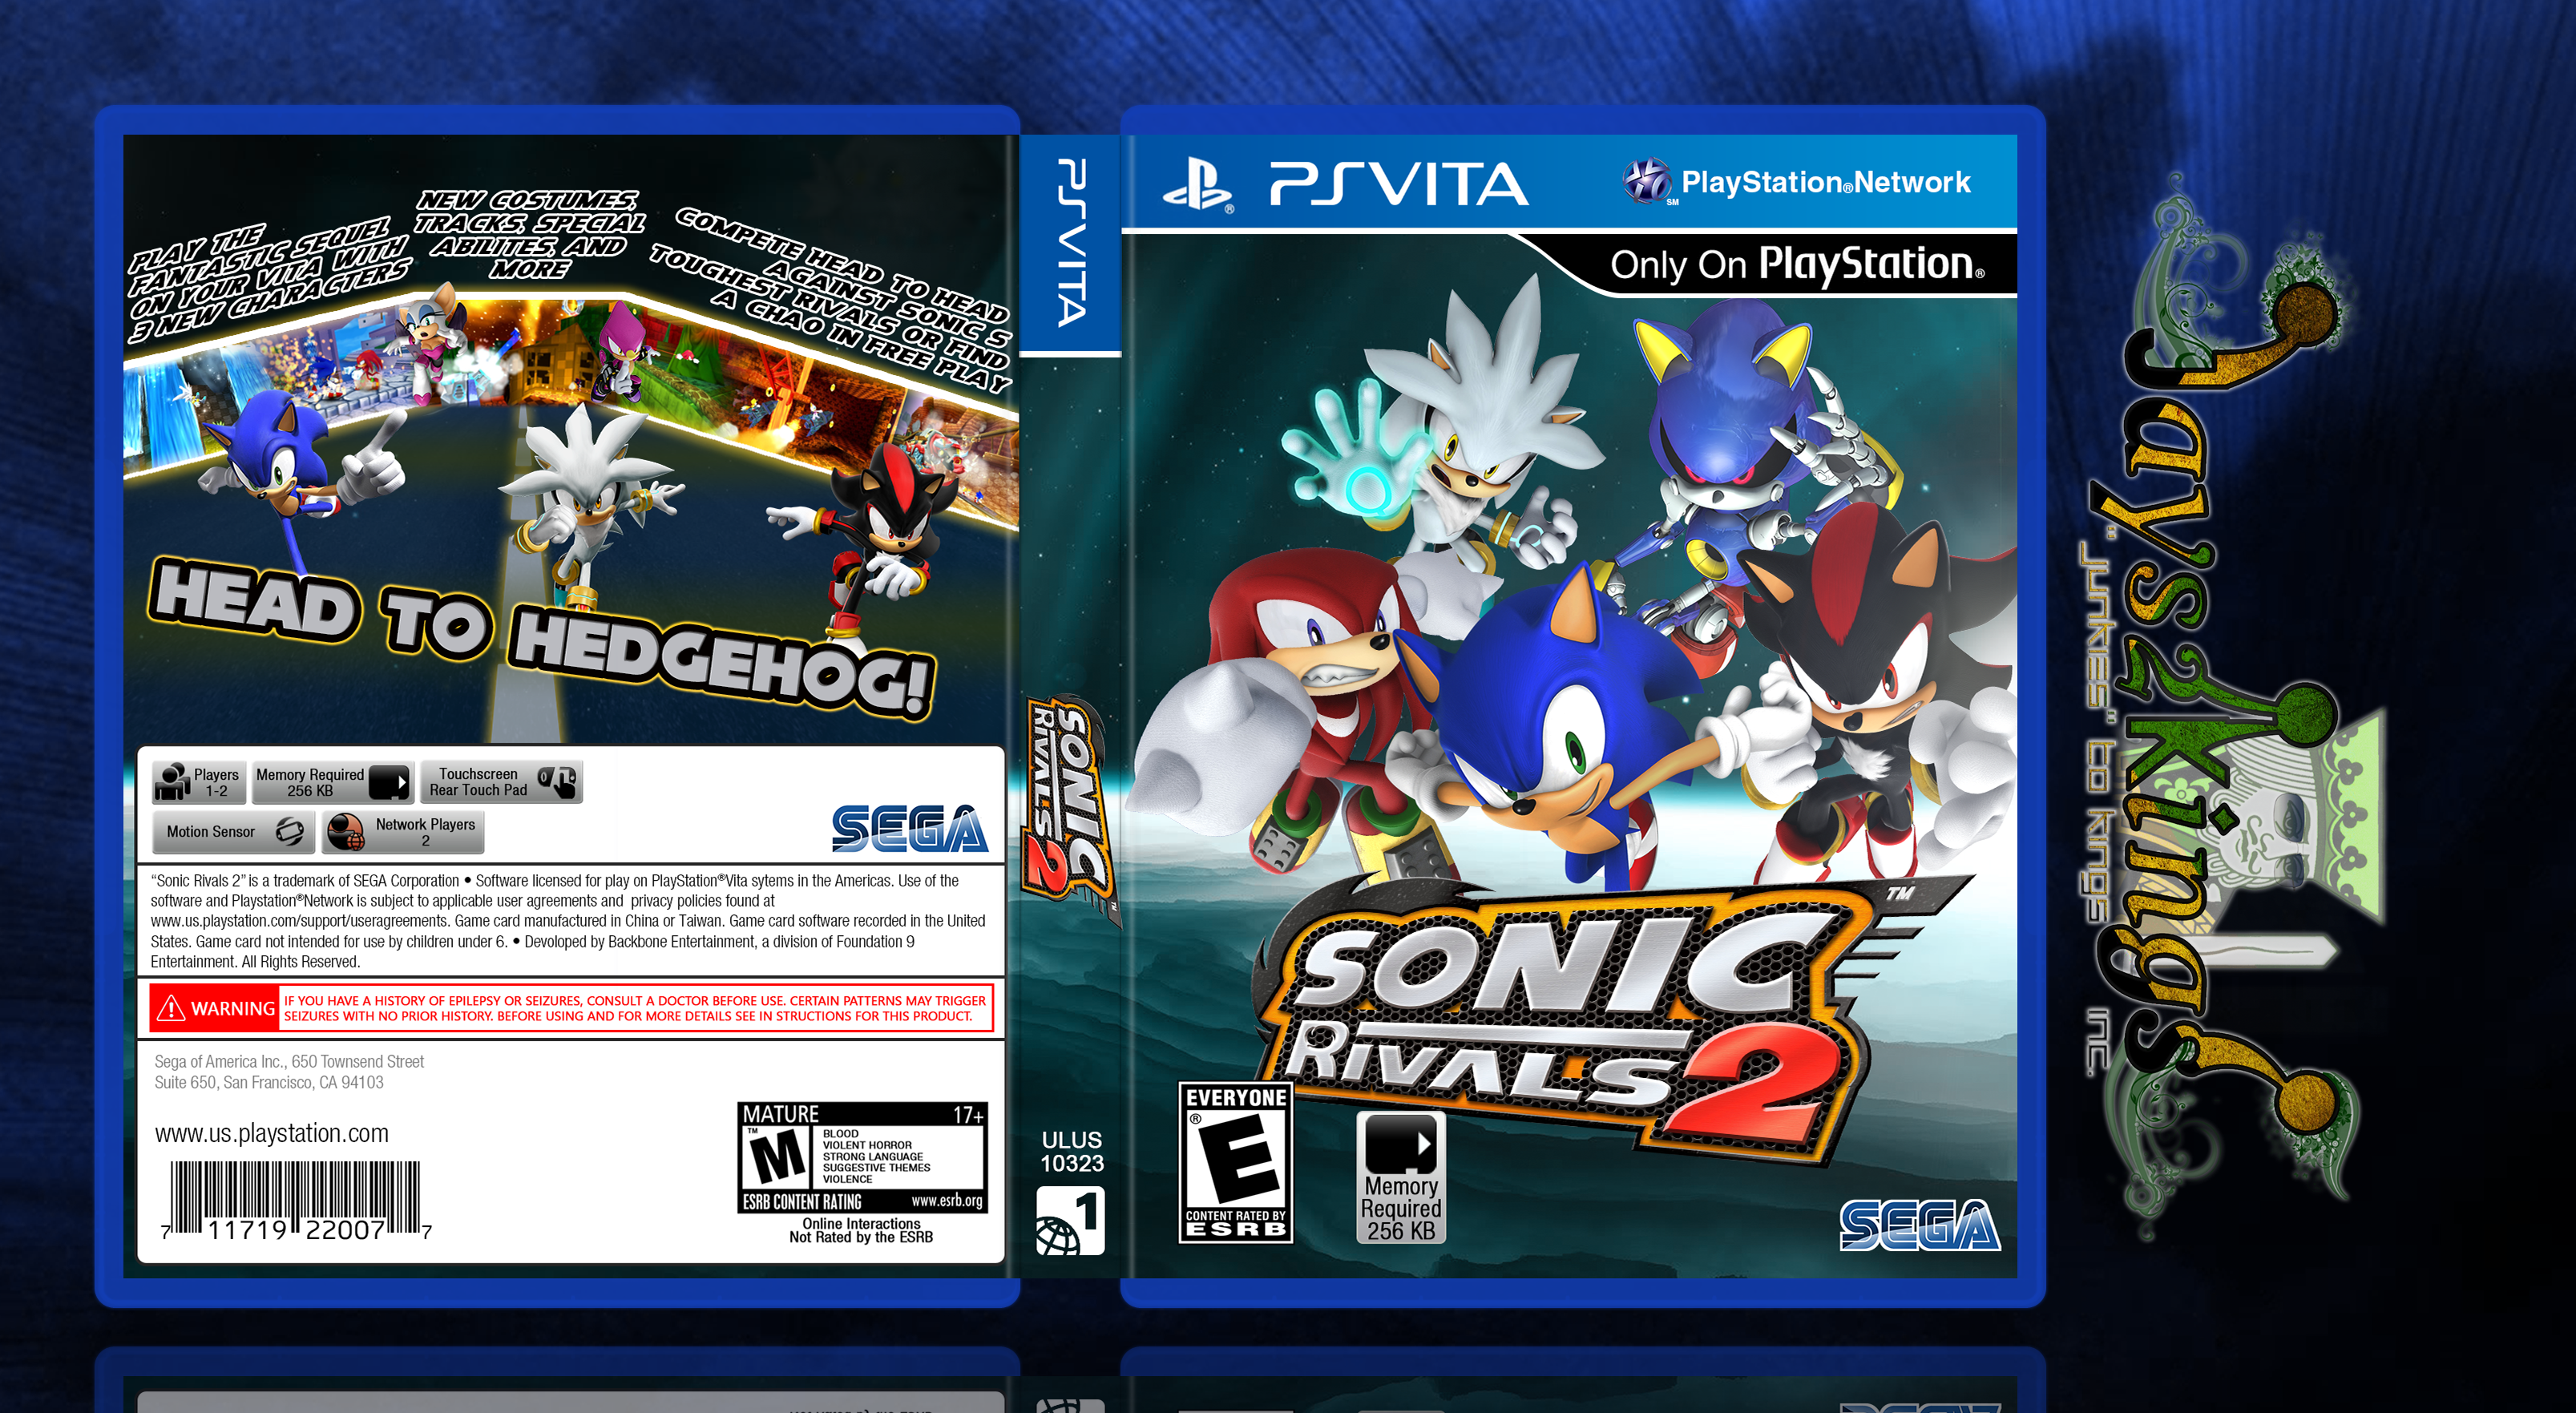 sonic rivals 2 download